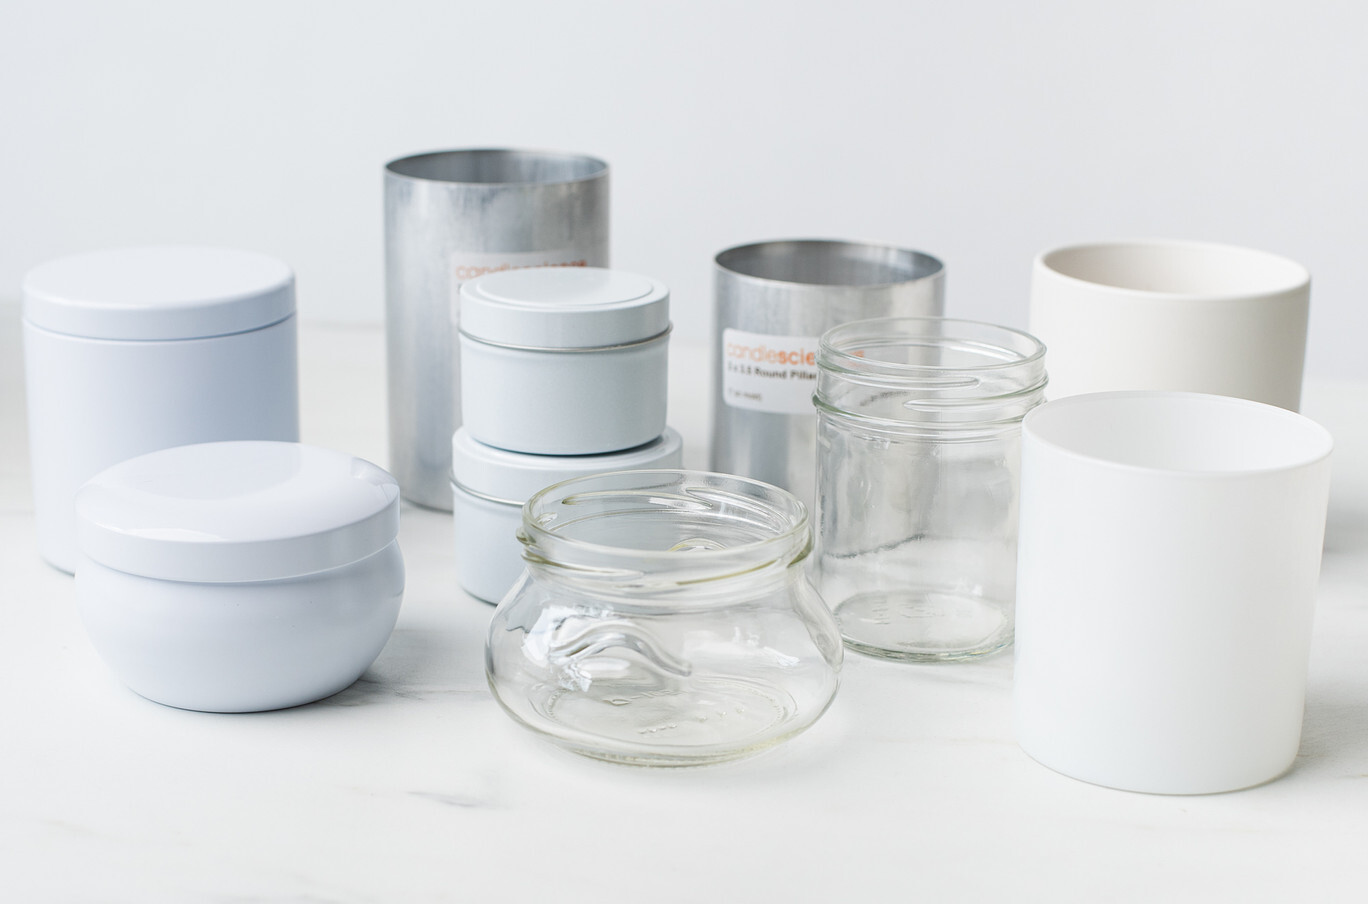 An array of candle containers, including a white glass jar, clear glass jars, a white ceramic jar, white tins, and silver pillar candle molds, sit against a white background.